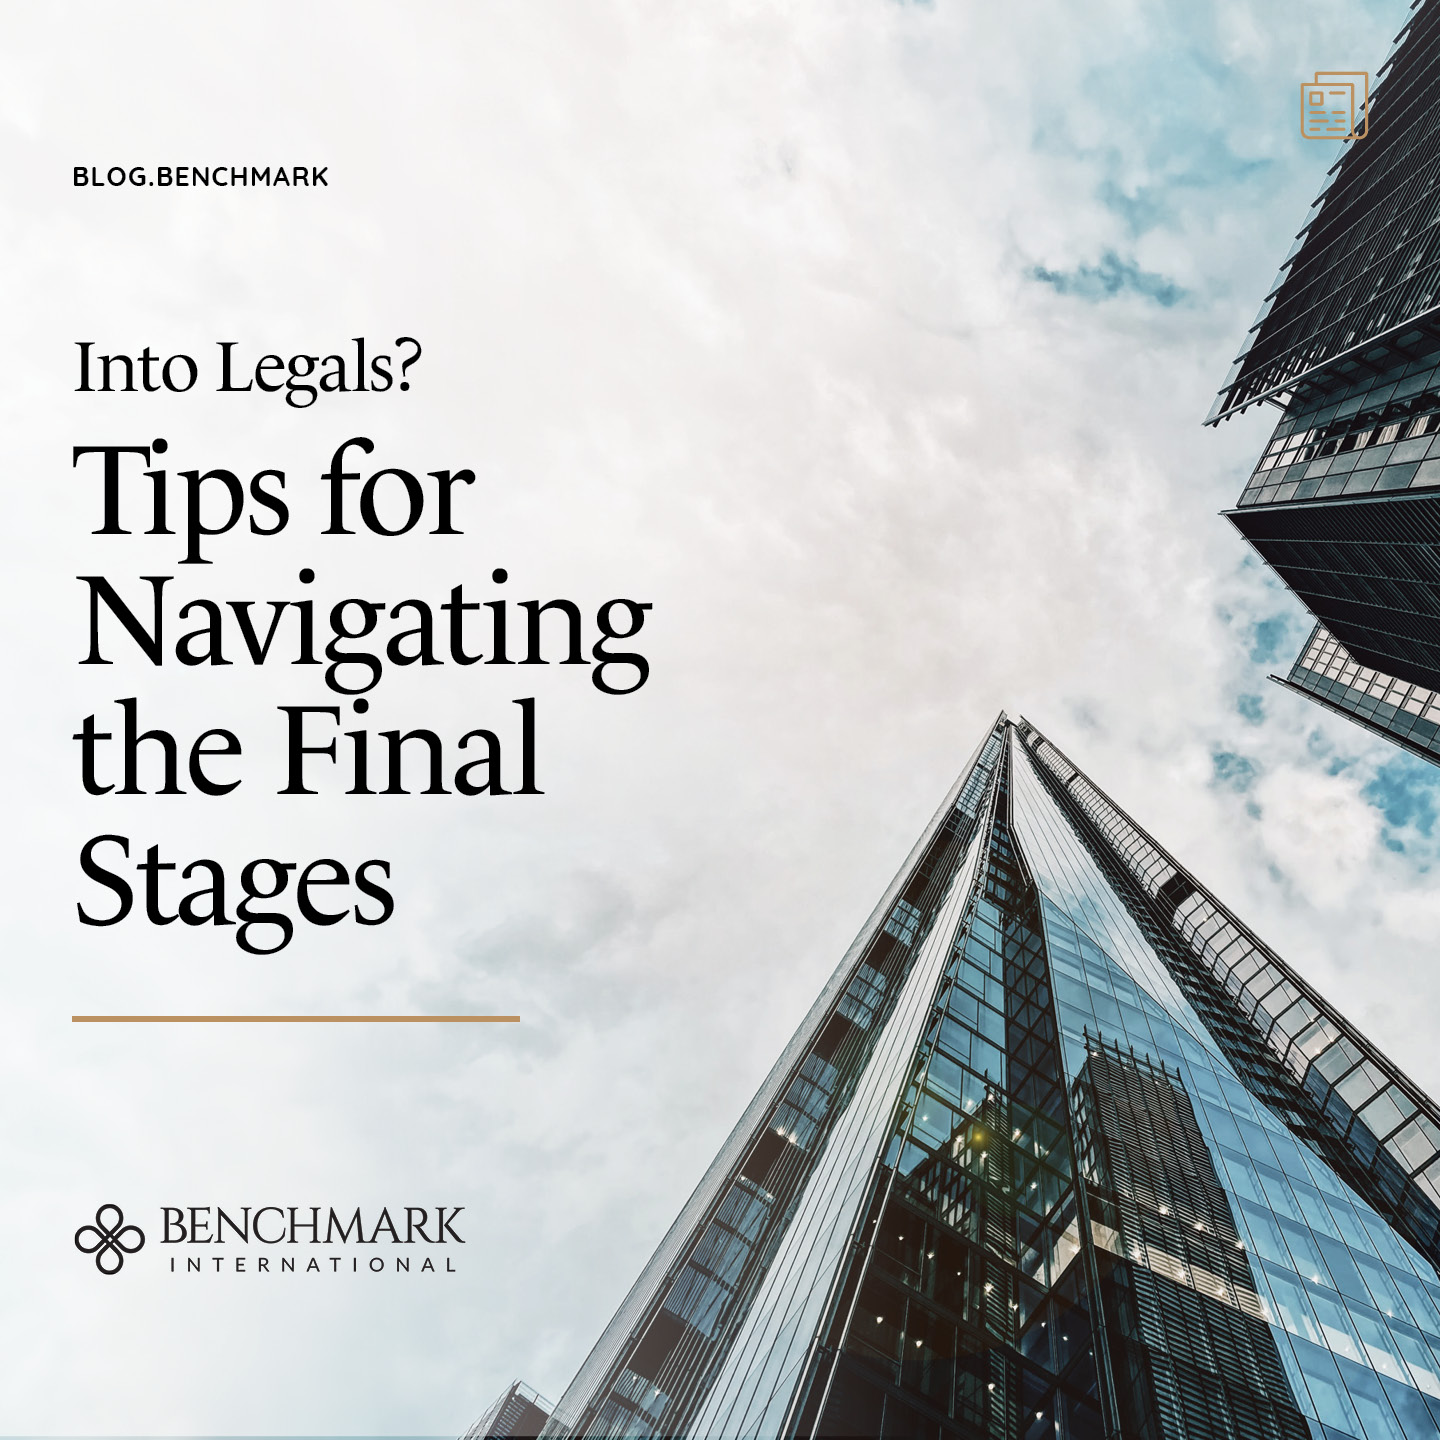 Tips for navigating the final stages